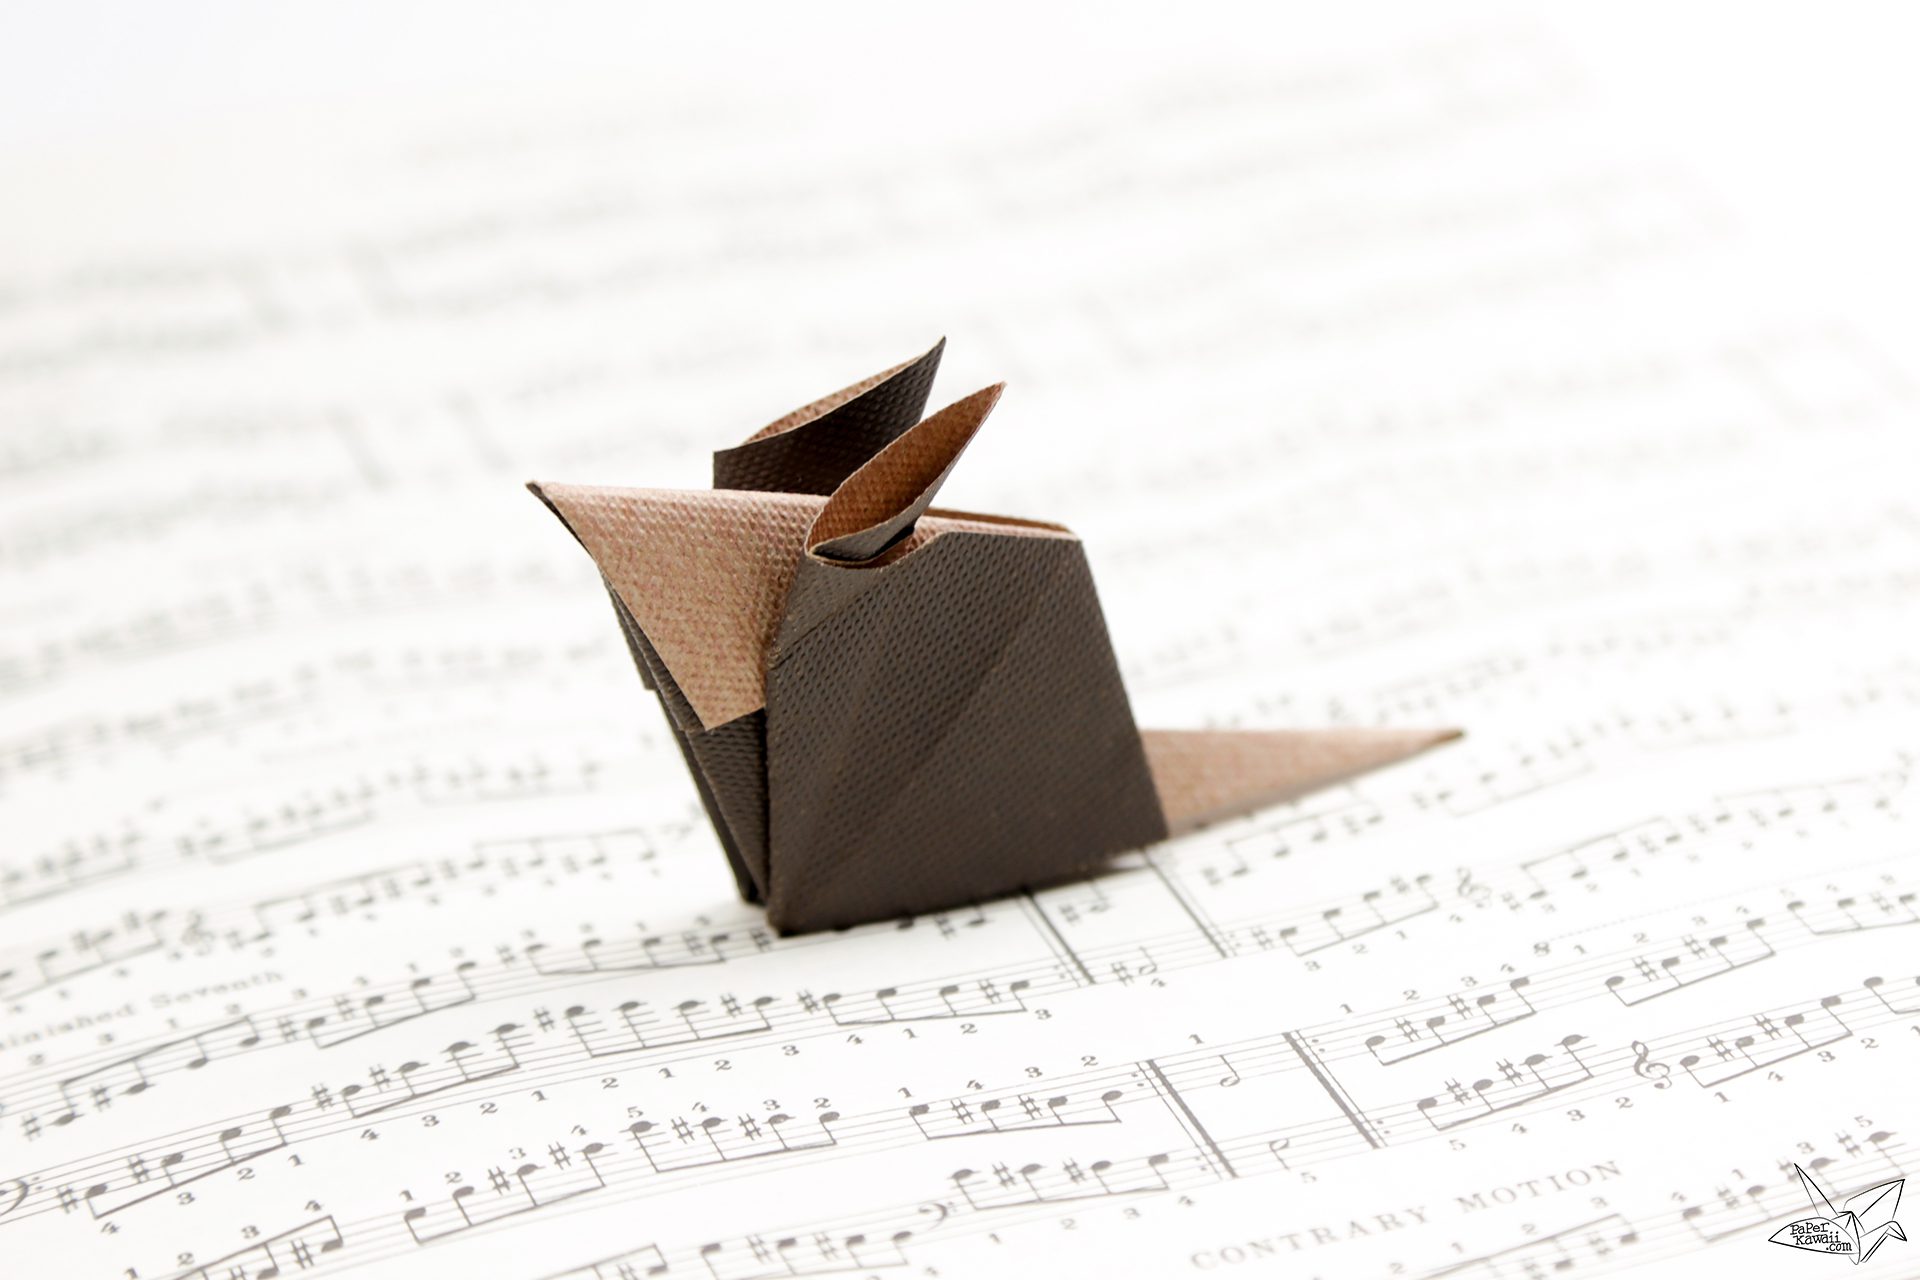 Cute origami mouse on music sheet paper - Paper Kawaii ♥︎